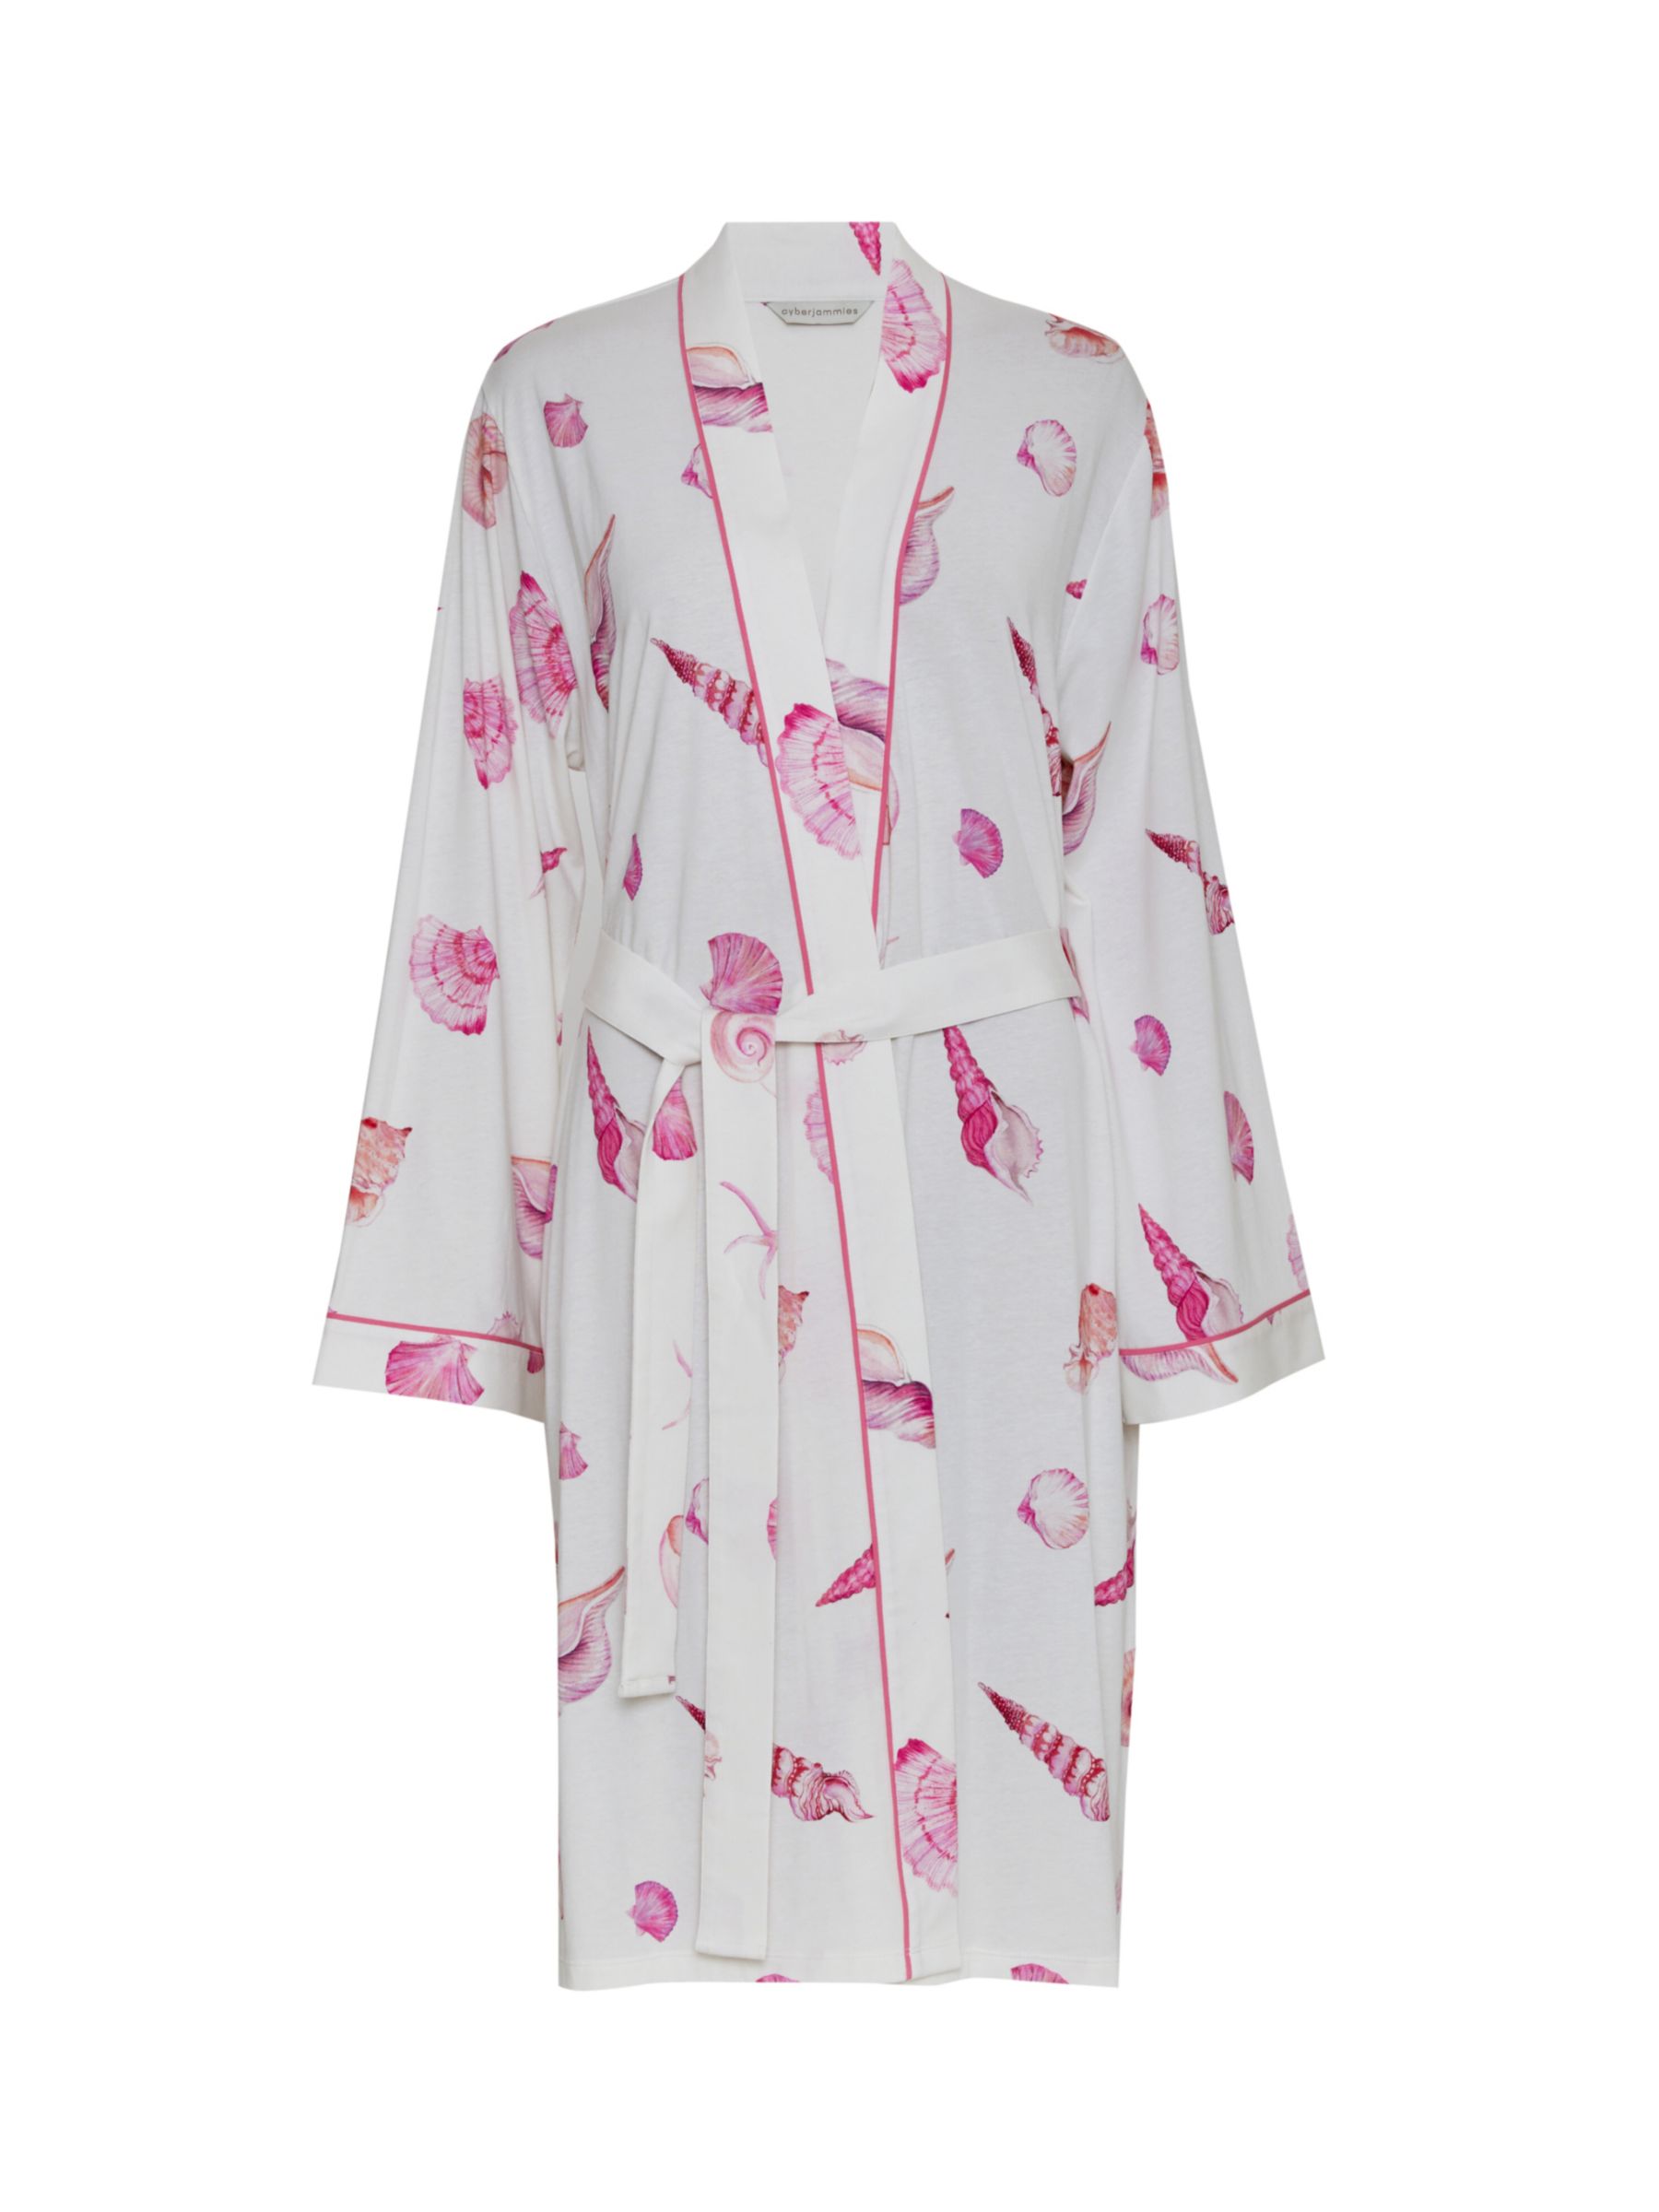 Cyberjammies Shelly Shell Printed Jersey Dressing Gown, Cream/Pink, 28